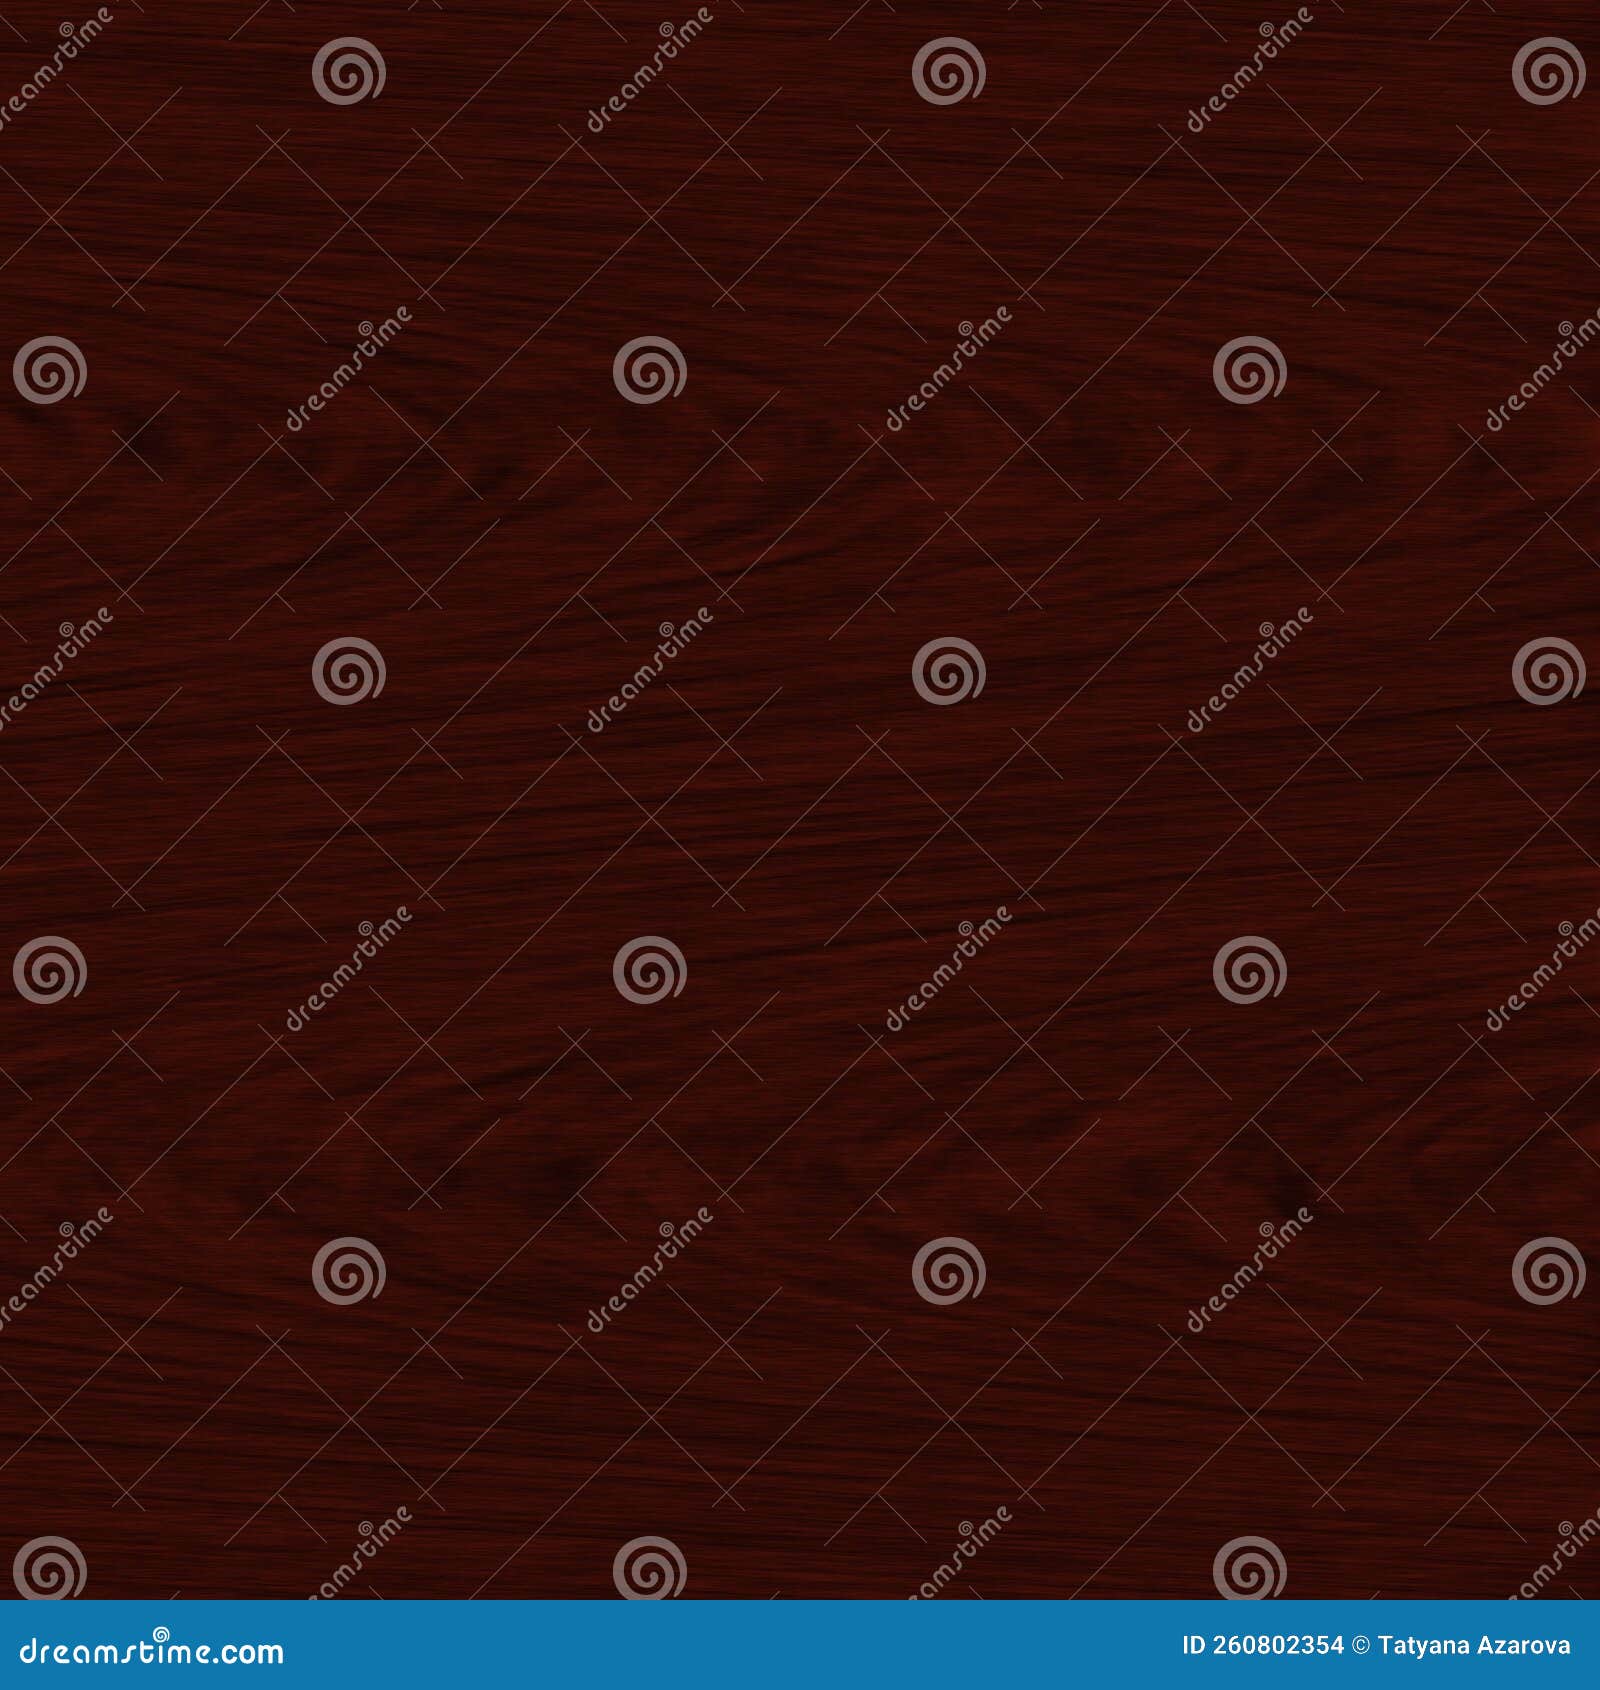 wood grain texture, realistic mahogany plank, dark red seamless pattern, wooden table, floor. great  for card, mockup. brown